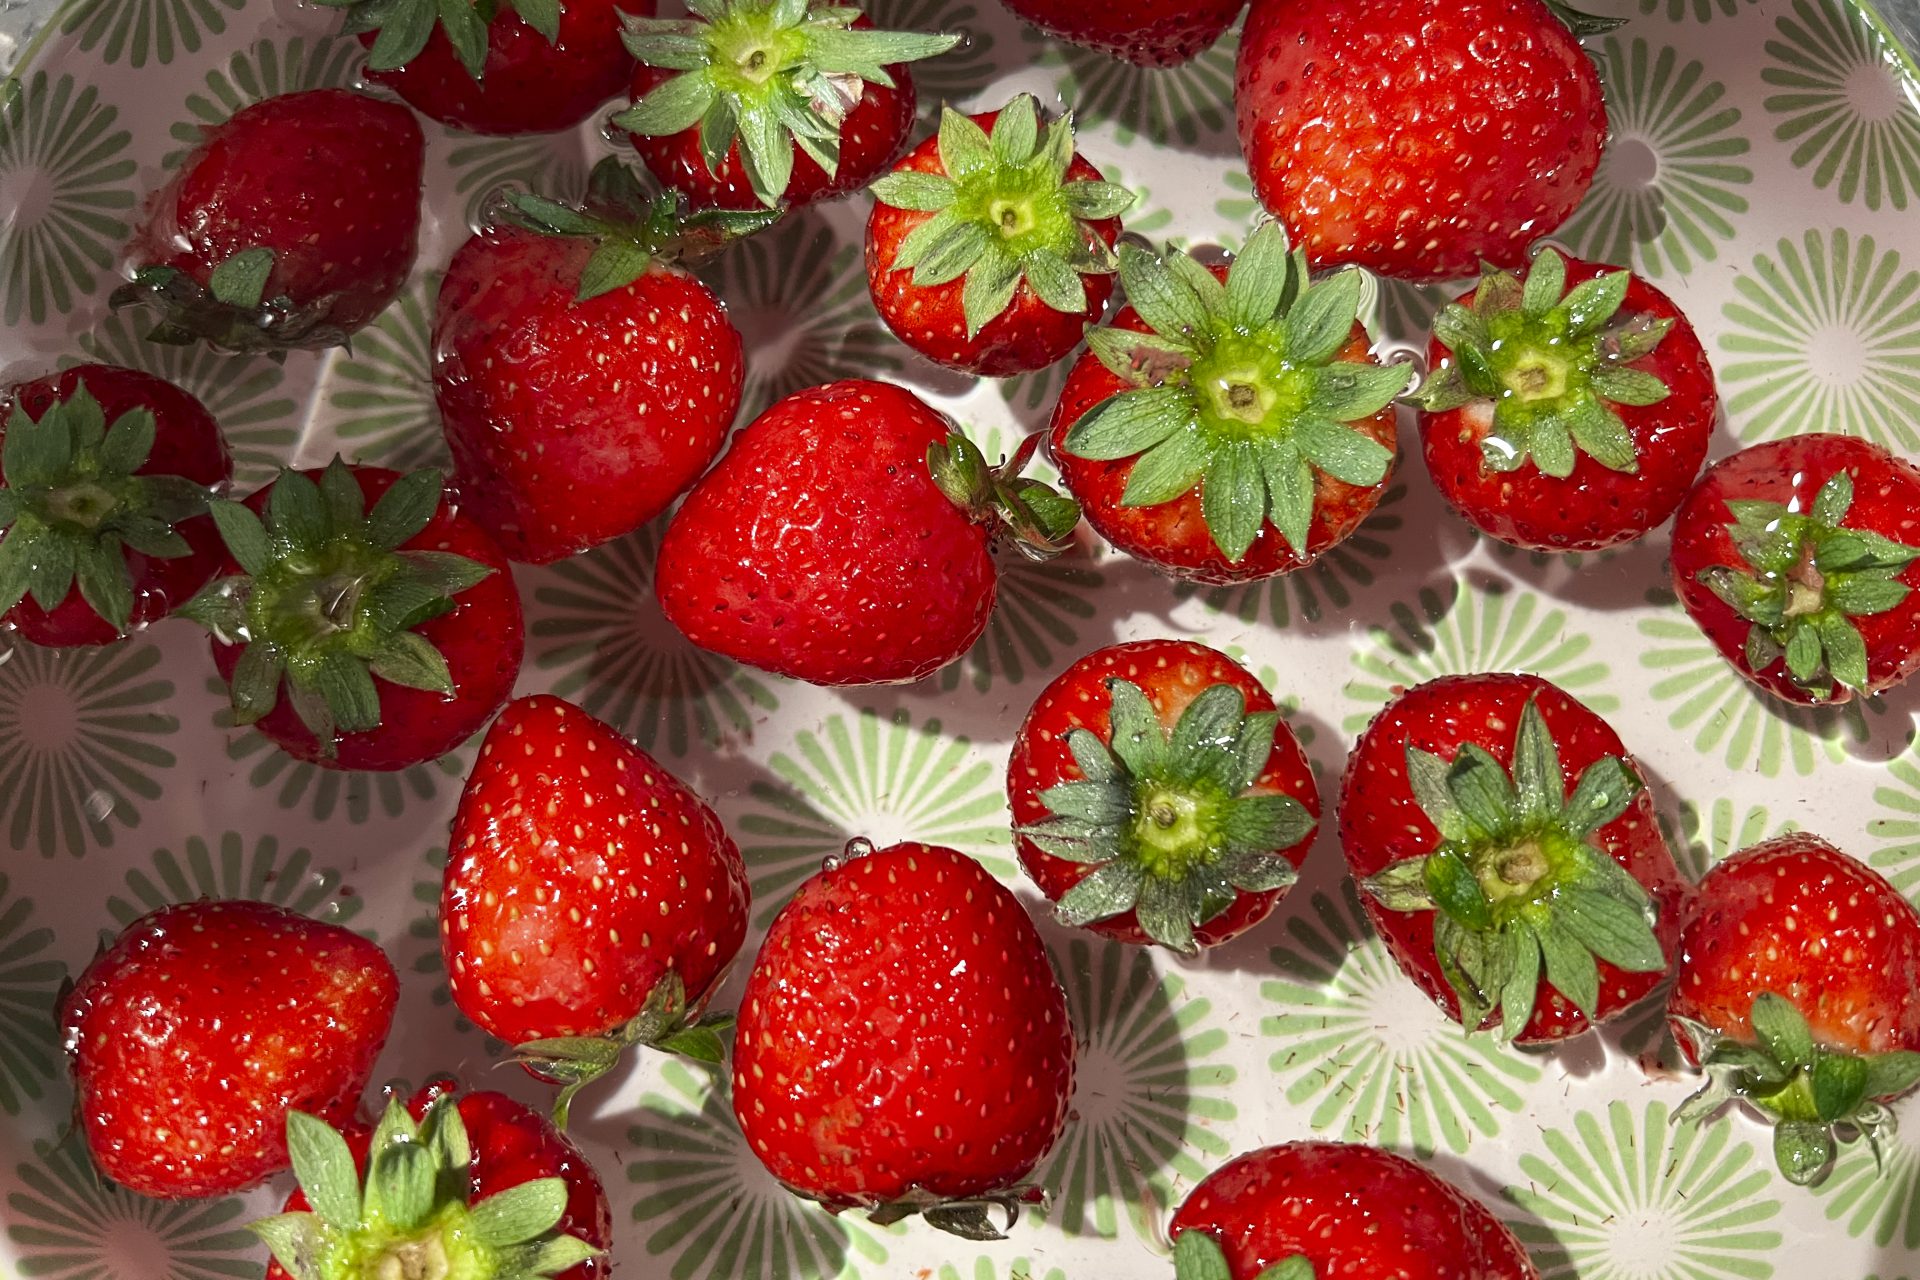 Strawberries: Be selective 